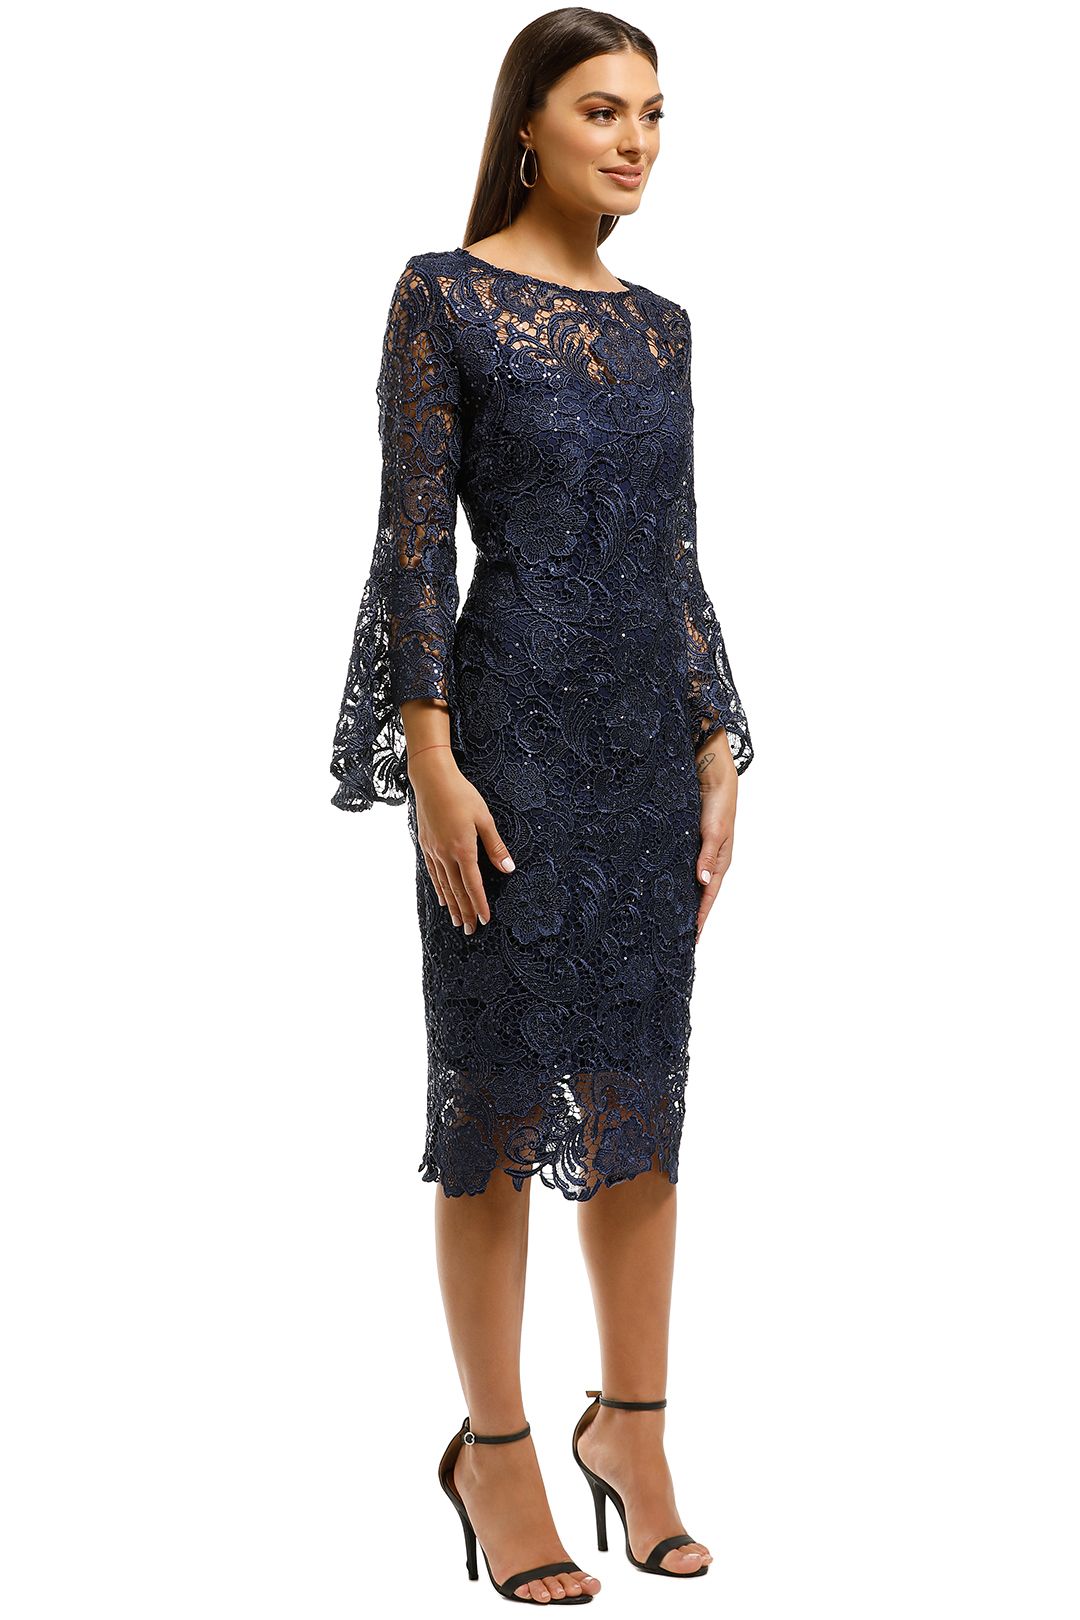 Montique-Chrystella-Lace-and-Sequin-Cocktail-Dress-Side